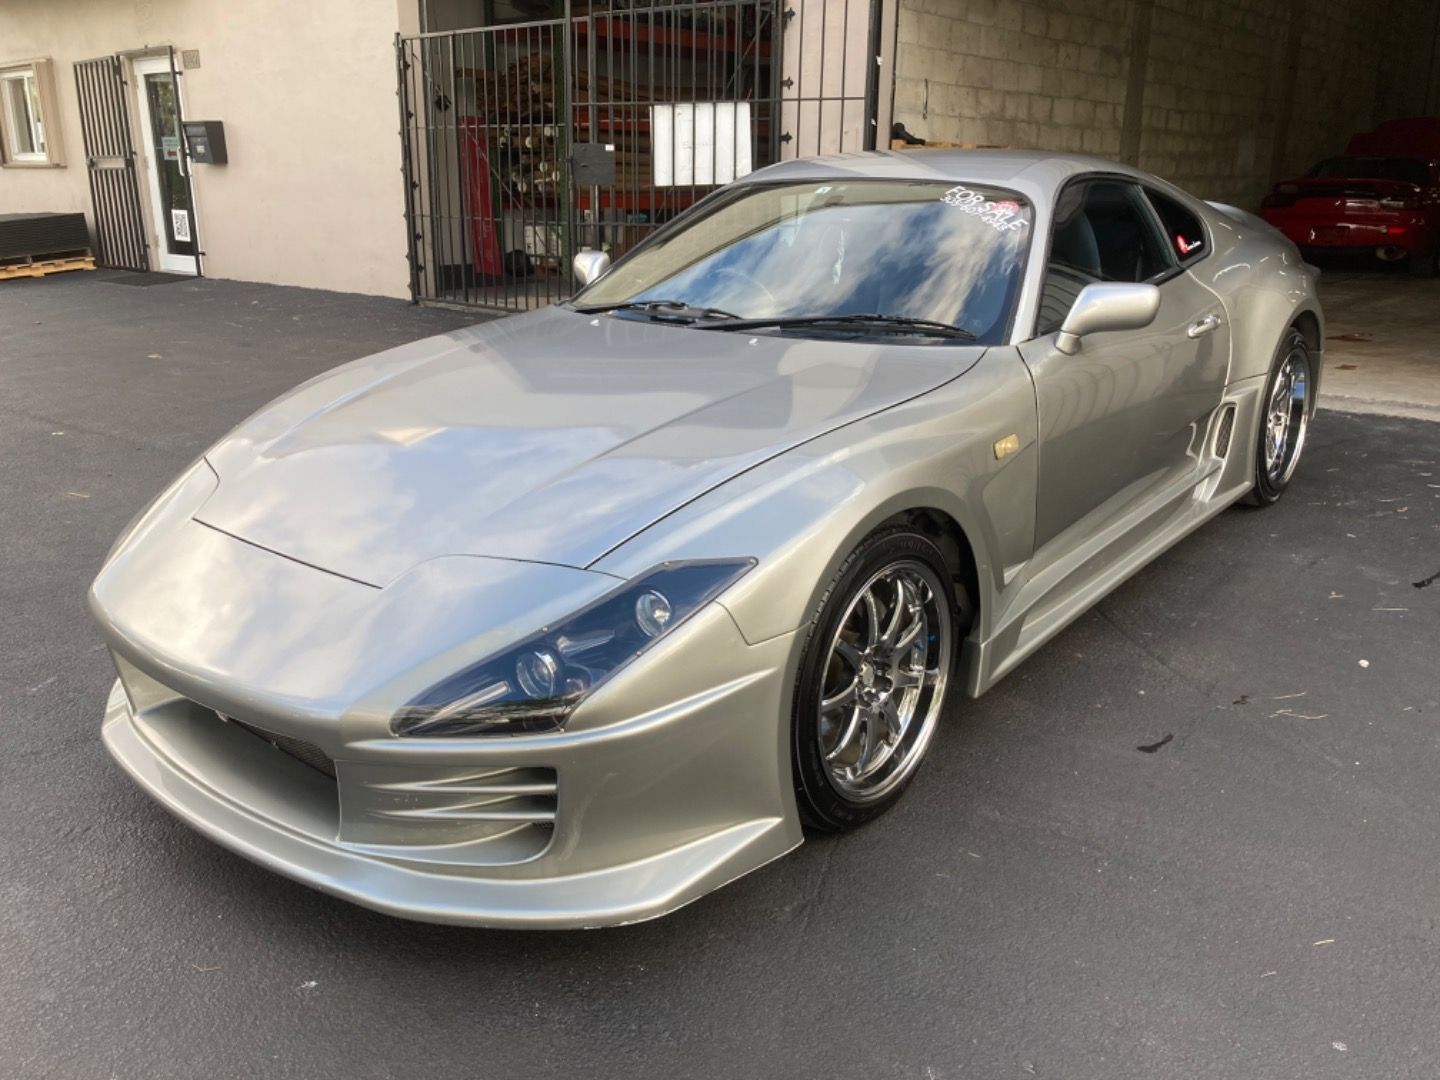 Supra With a Top Secret for Sale in the U.S. Pictures